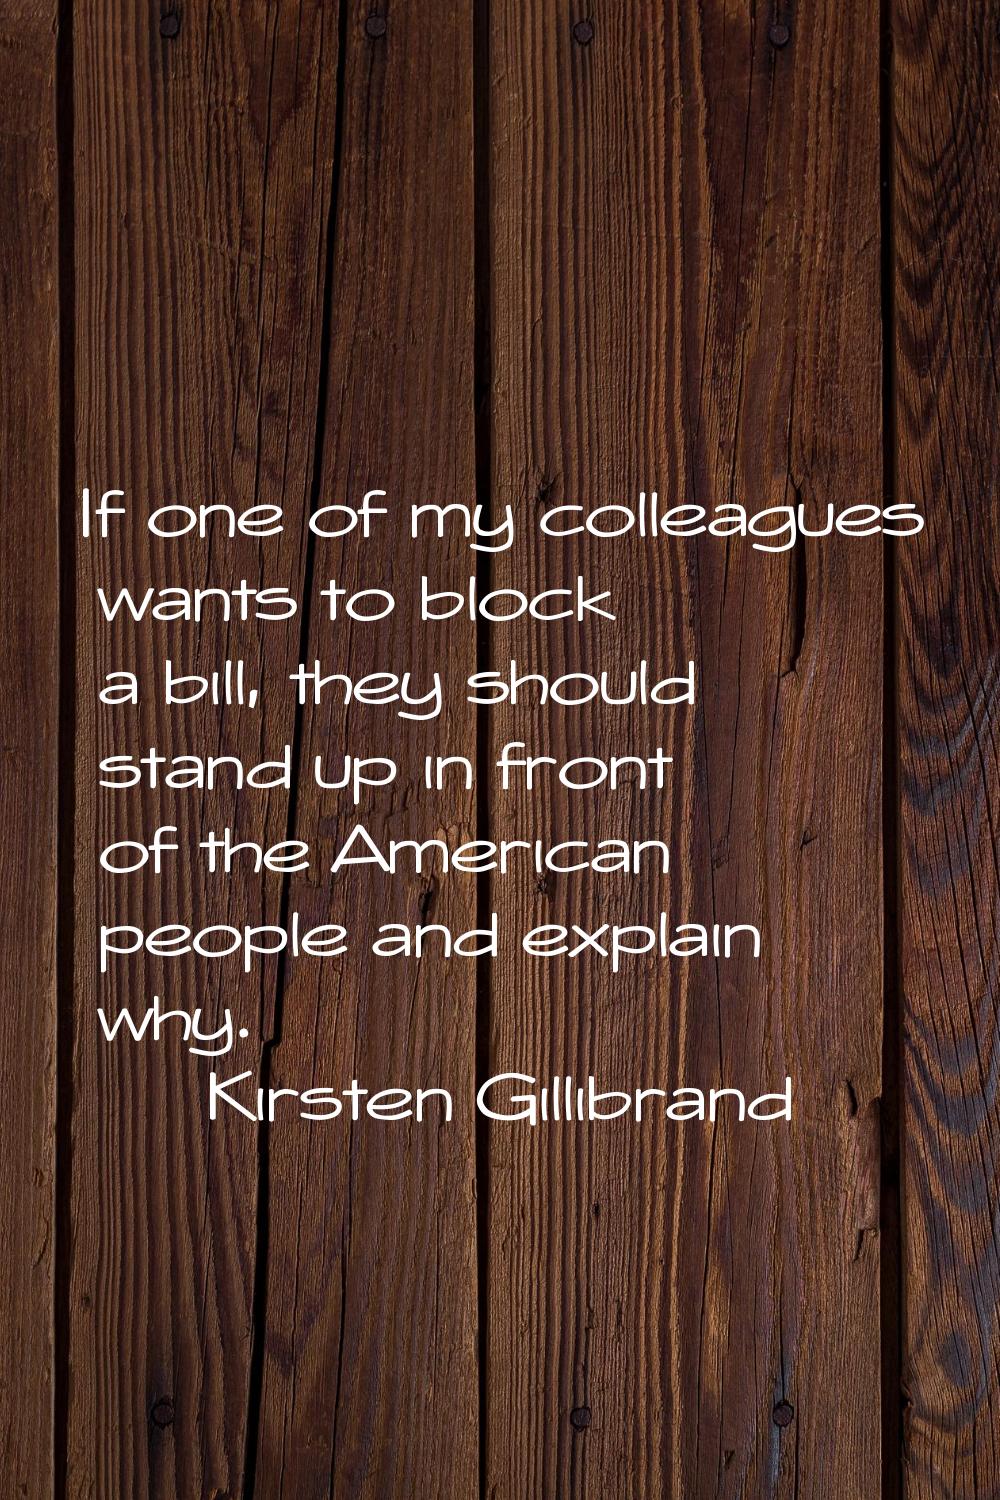 If one of my colleagues wants to block a bill, they should stand up in front of the American people